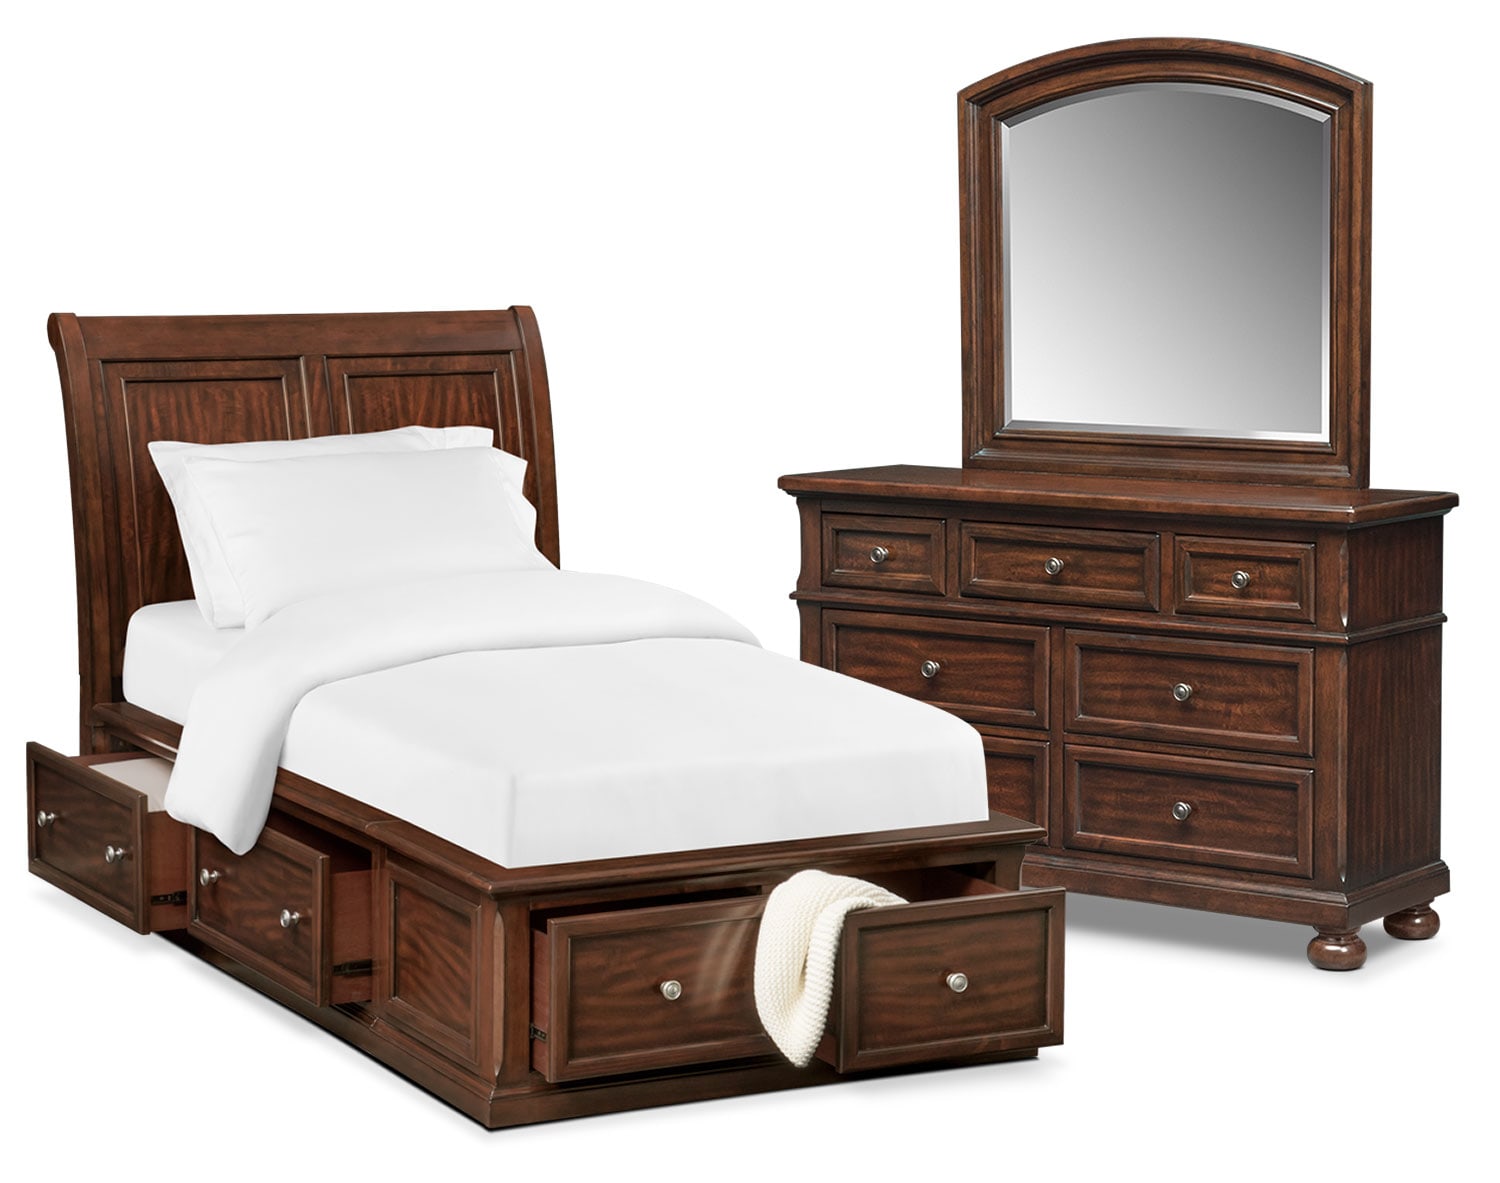 Hanover Youth 5 Piece Sleigh Storage Bedroom Set With Dresser And